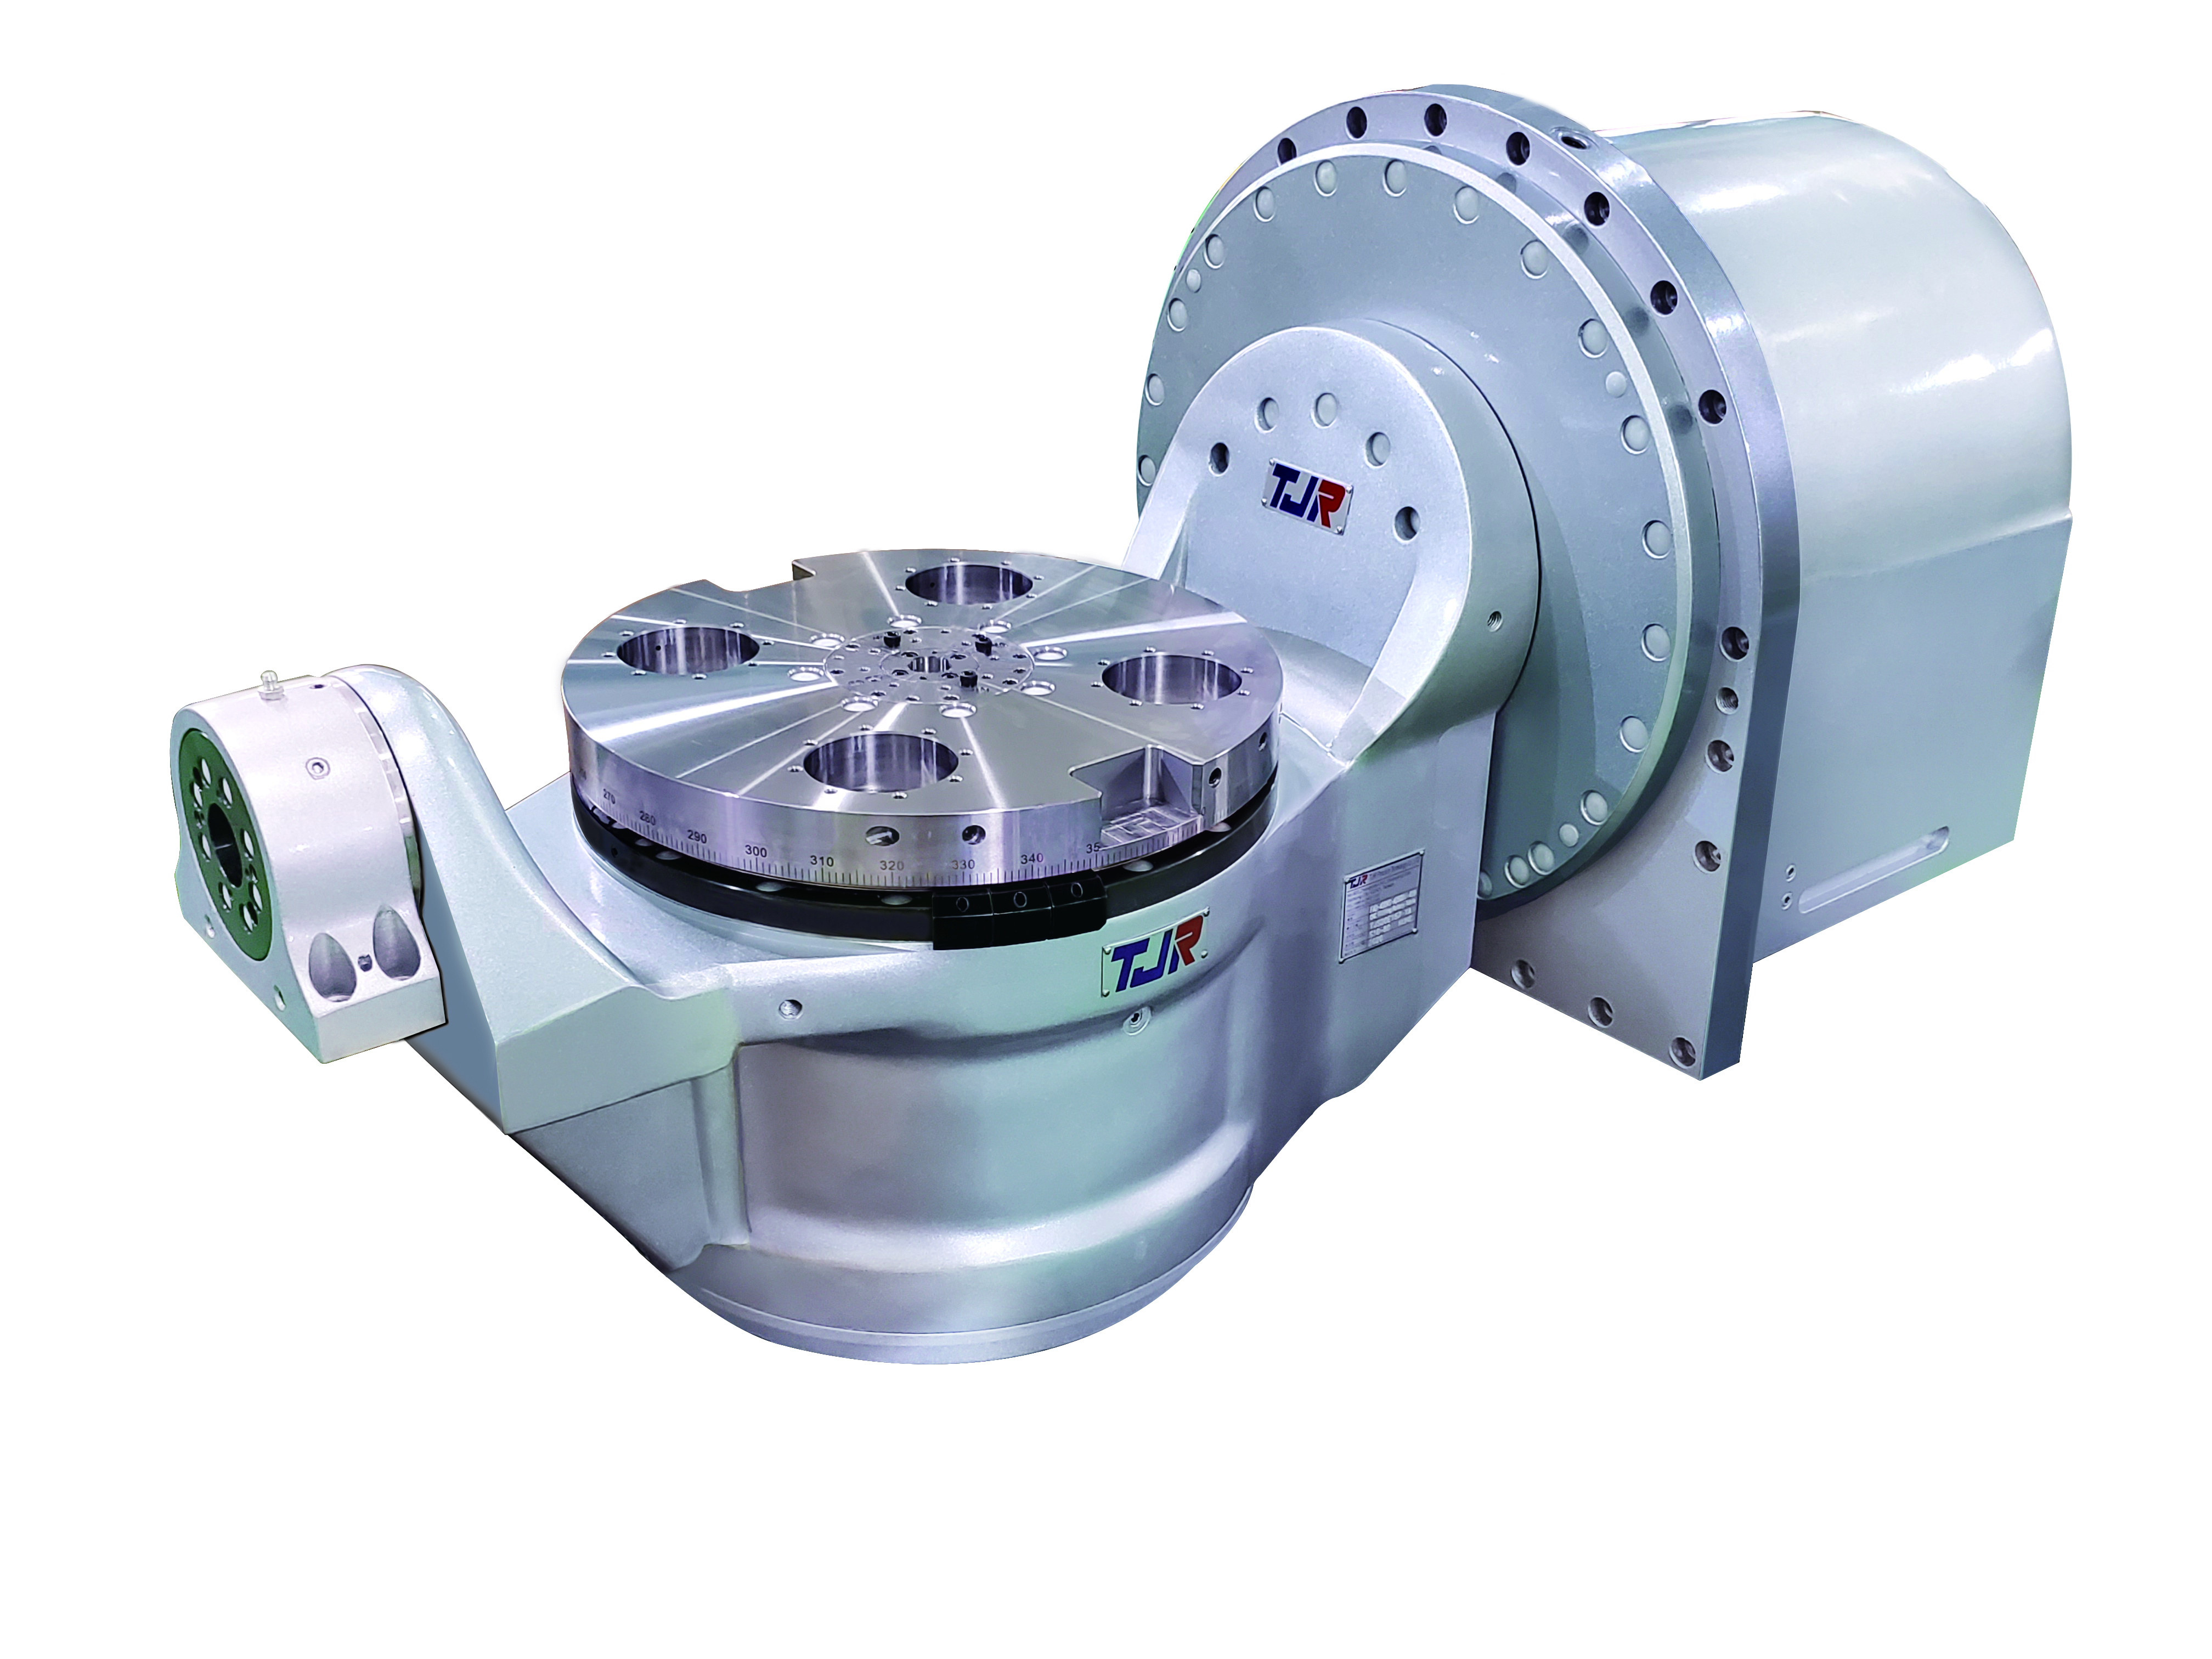 Products|The 4th & 5th Axis Direct Drive Motor Series - The 4th Axis Direct Drive Motor Series (Pneumatic Brake)